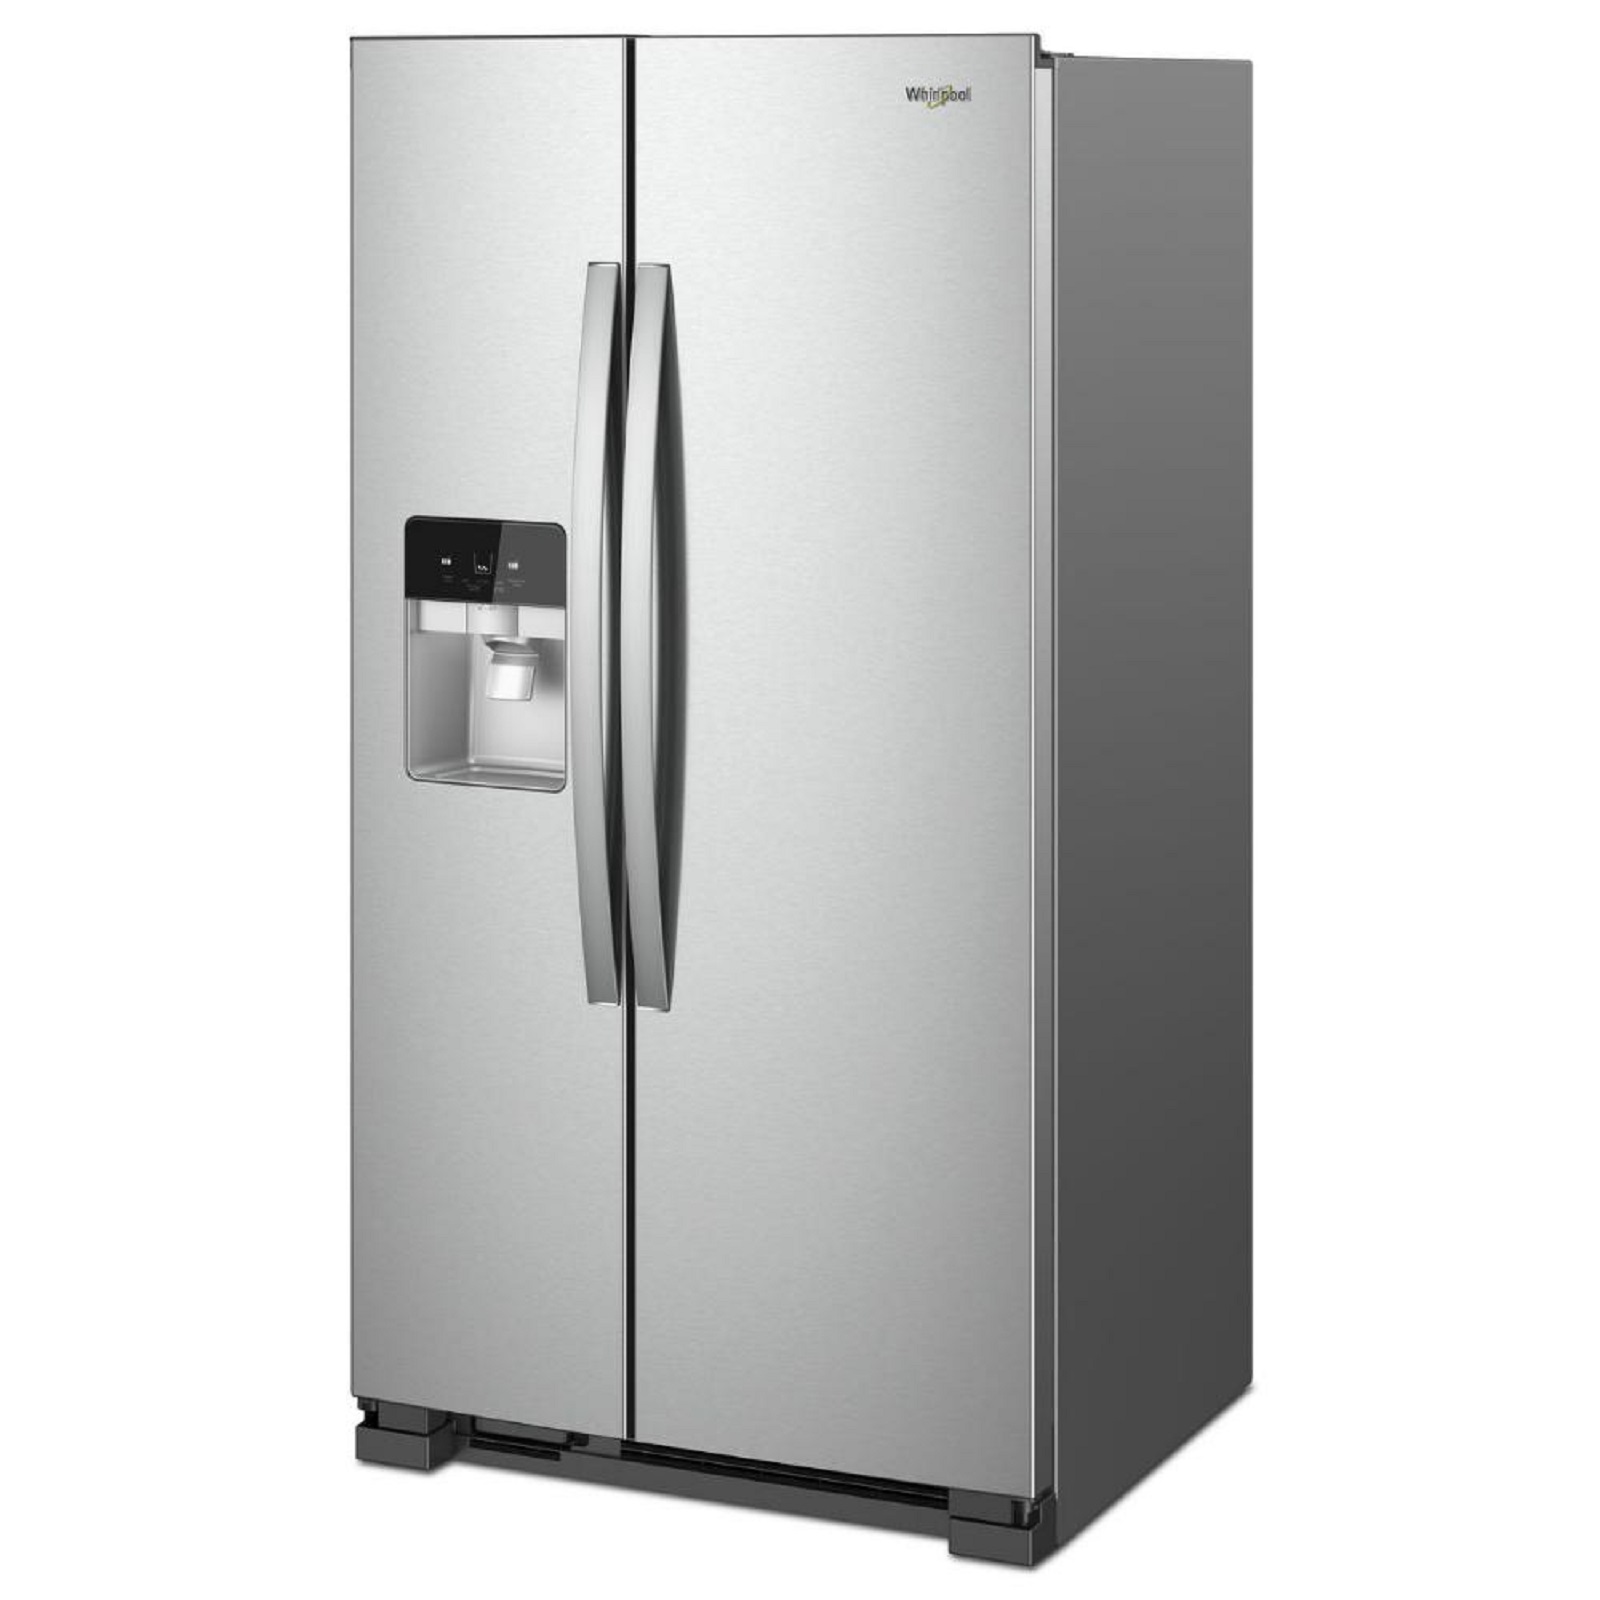 Stainless Steel Side By Side Whirlpool Refrigerator